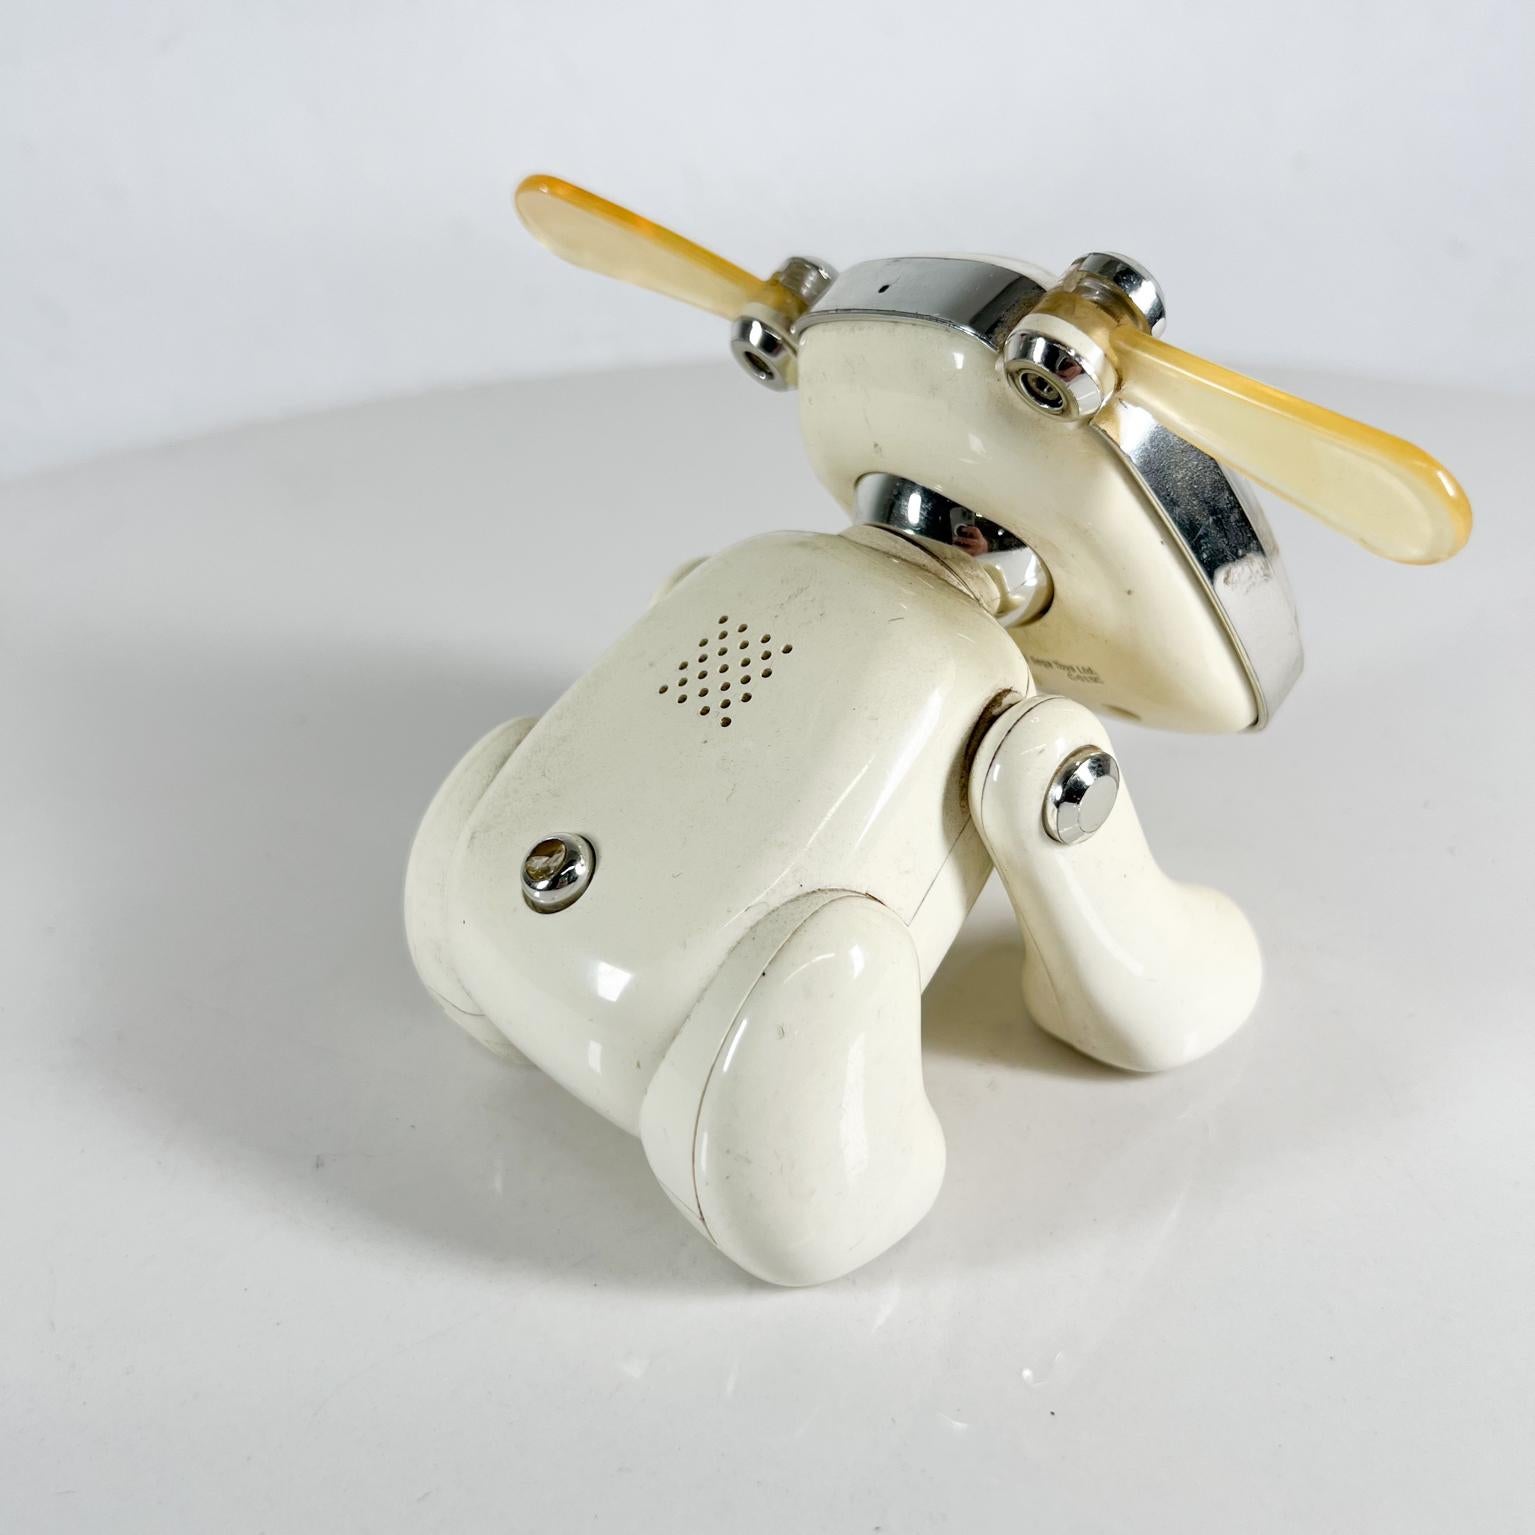 Cute speaker mini dog robot music loving canine
Mini audio robot
Battery operated
Measures: 3.5 tall x 4.25 deep x 5.5 wide
Review images provided.

